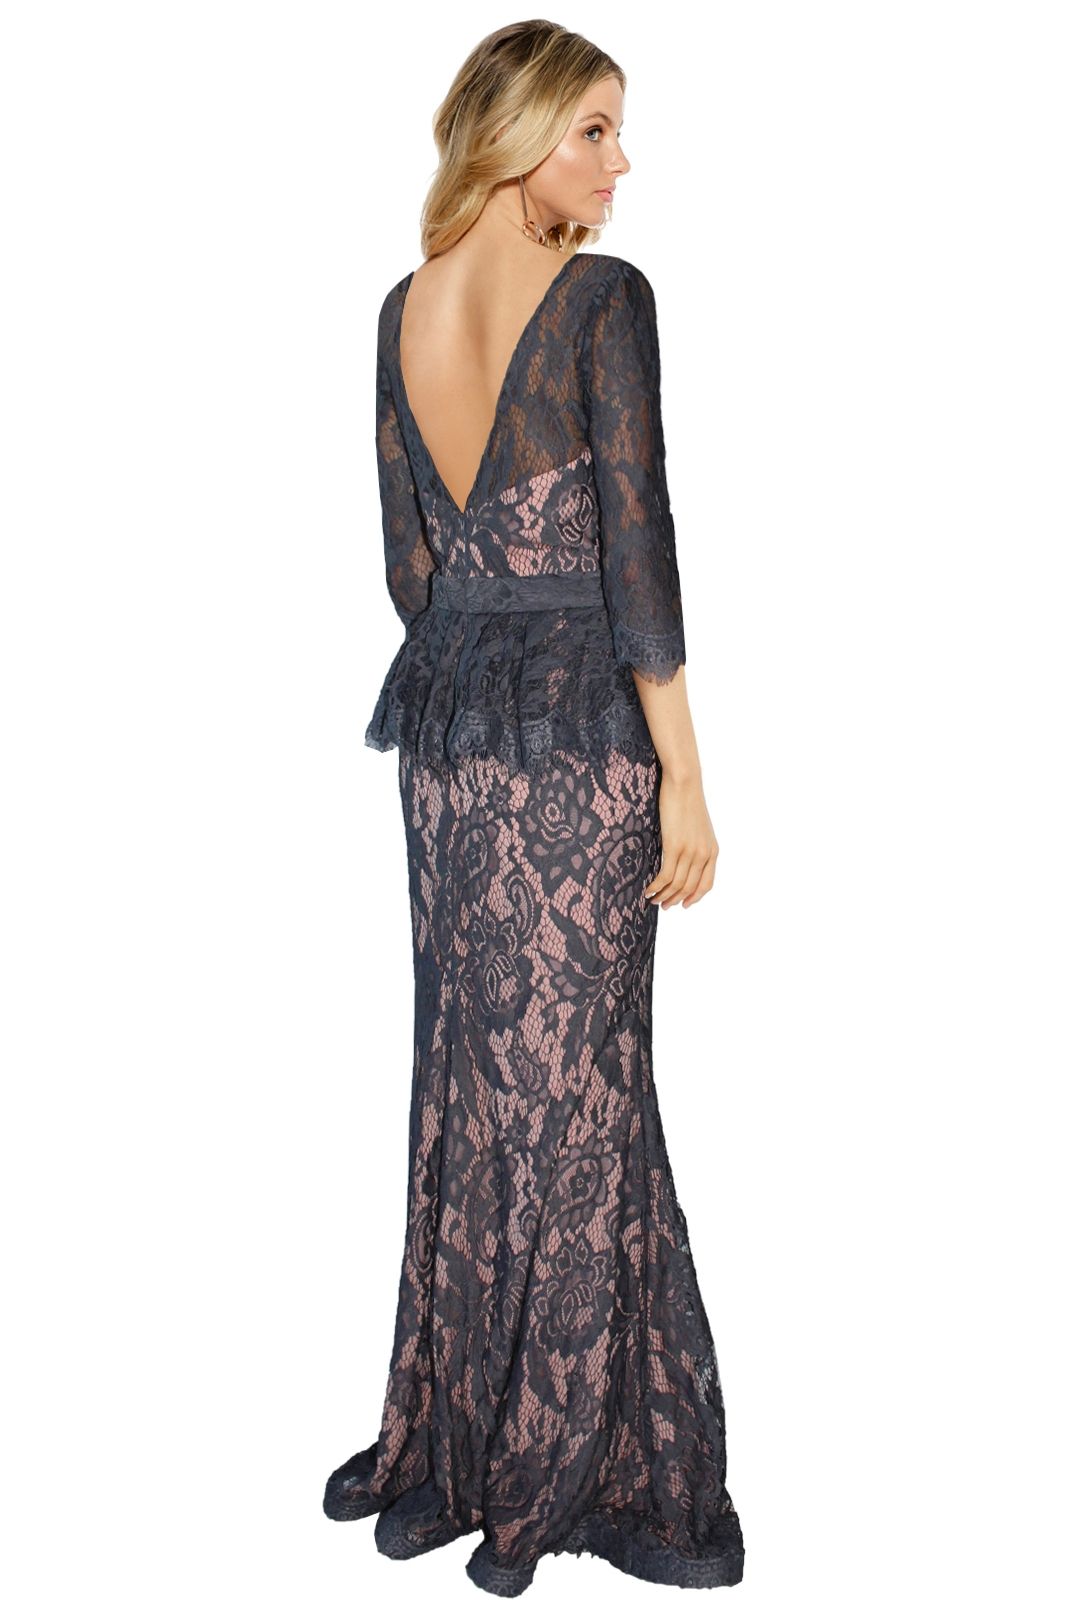 Jadore - Tessa Lace Gown - Grey Lace - Back